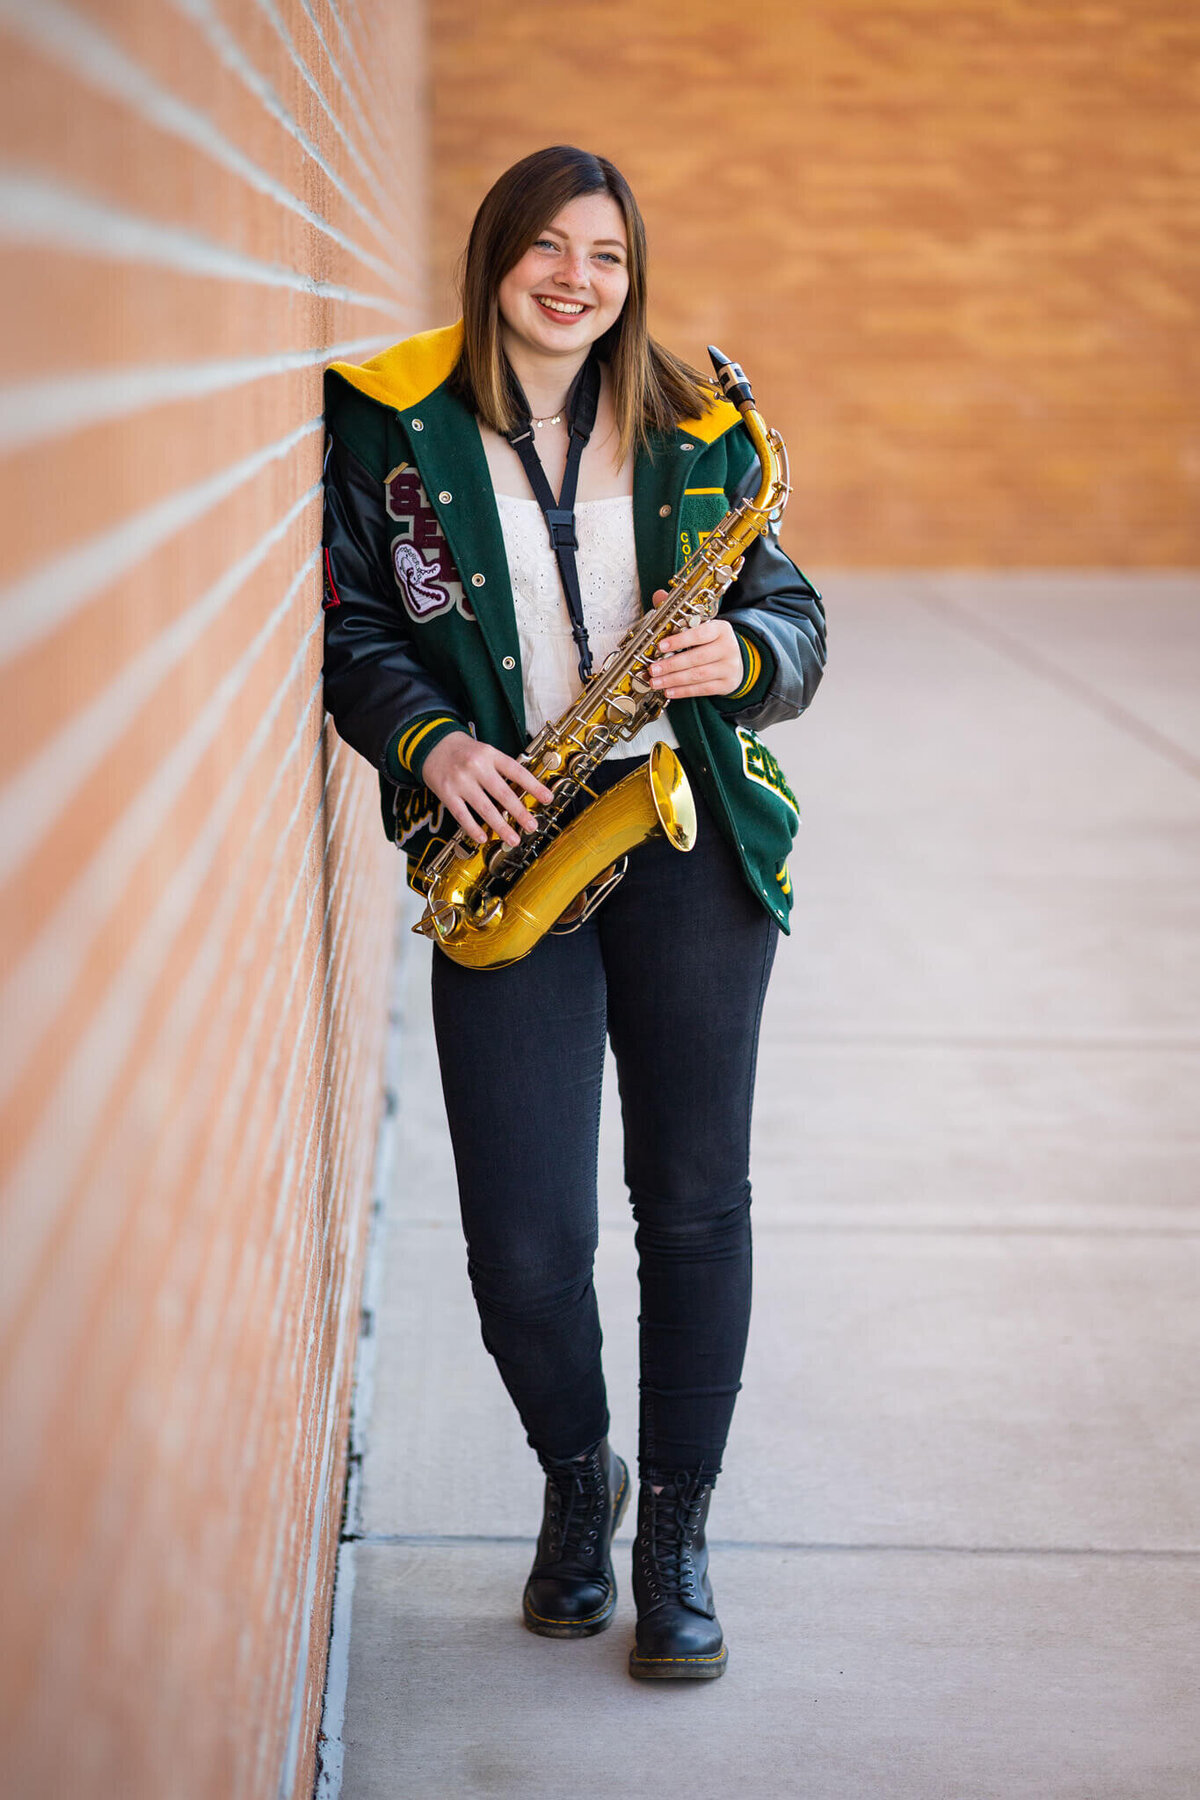 high school senior holding her saxophone leaning against a brick wall